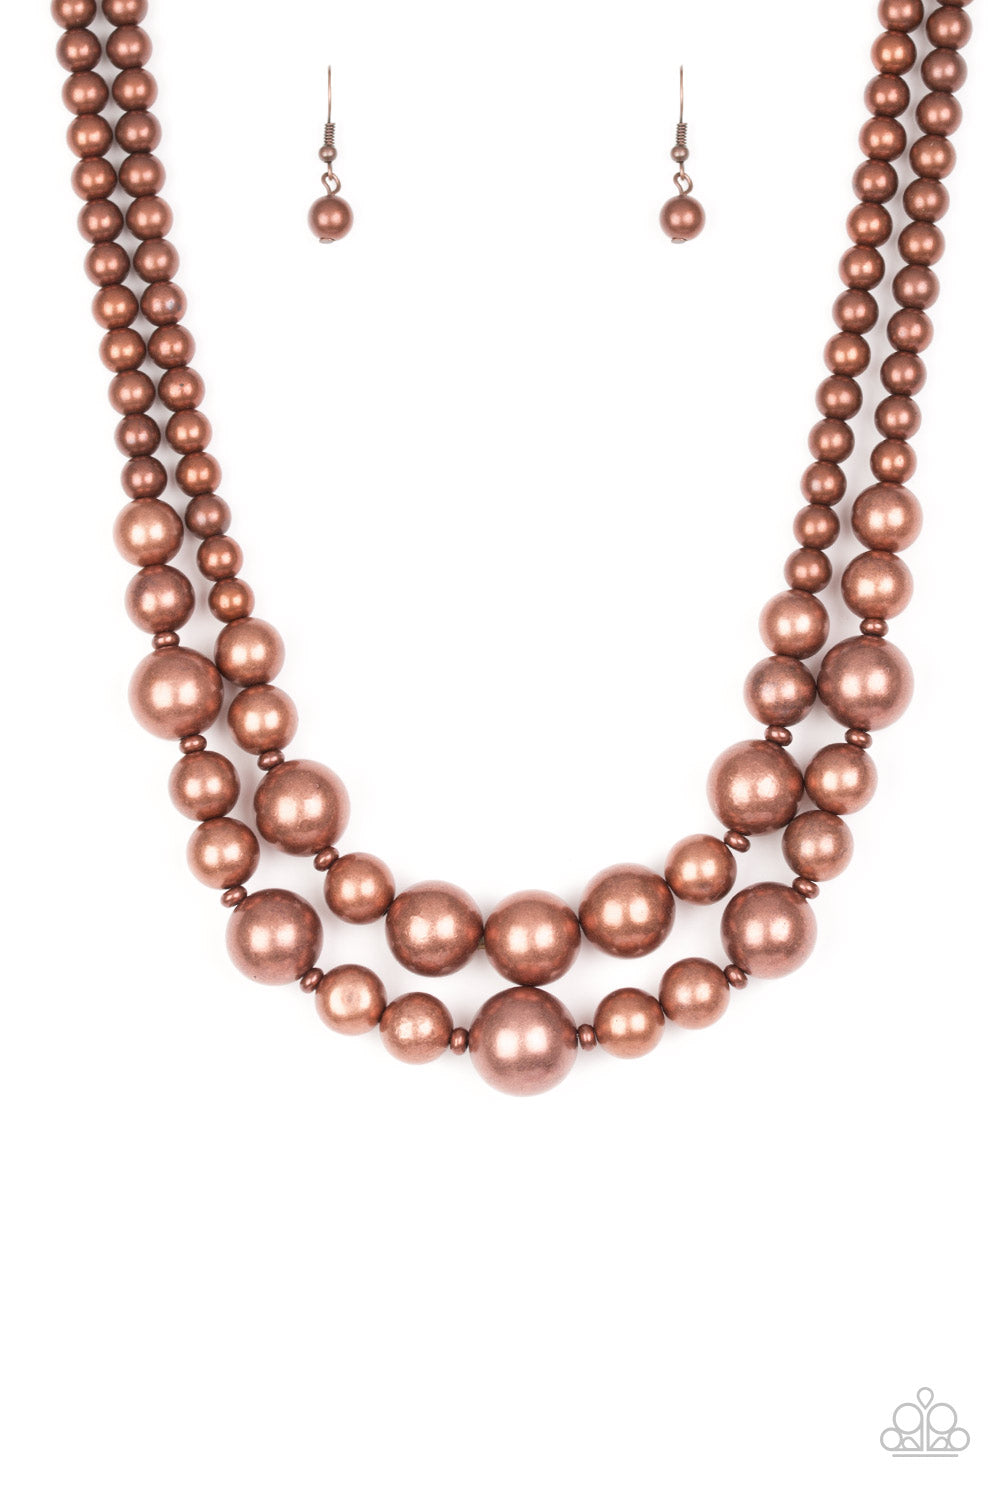 Paparazzi I Double Dare You - Copper Necklace – Big Papa's Bling